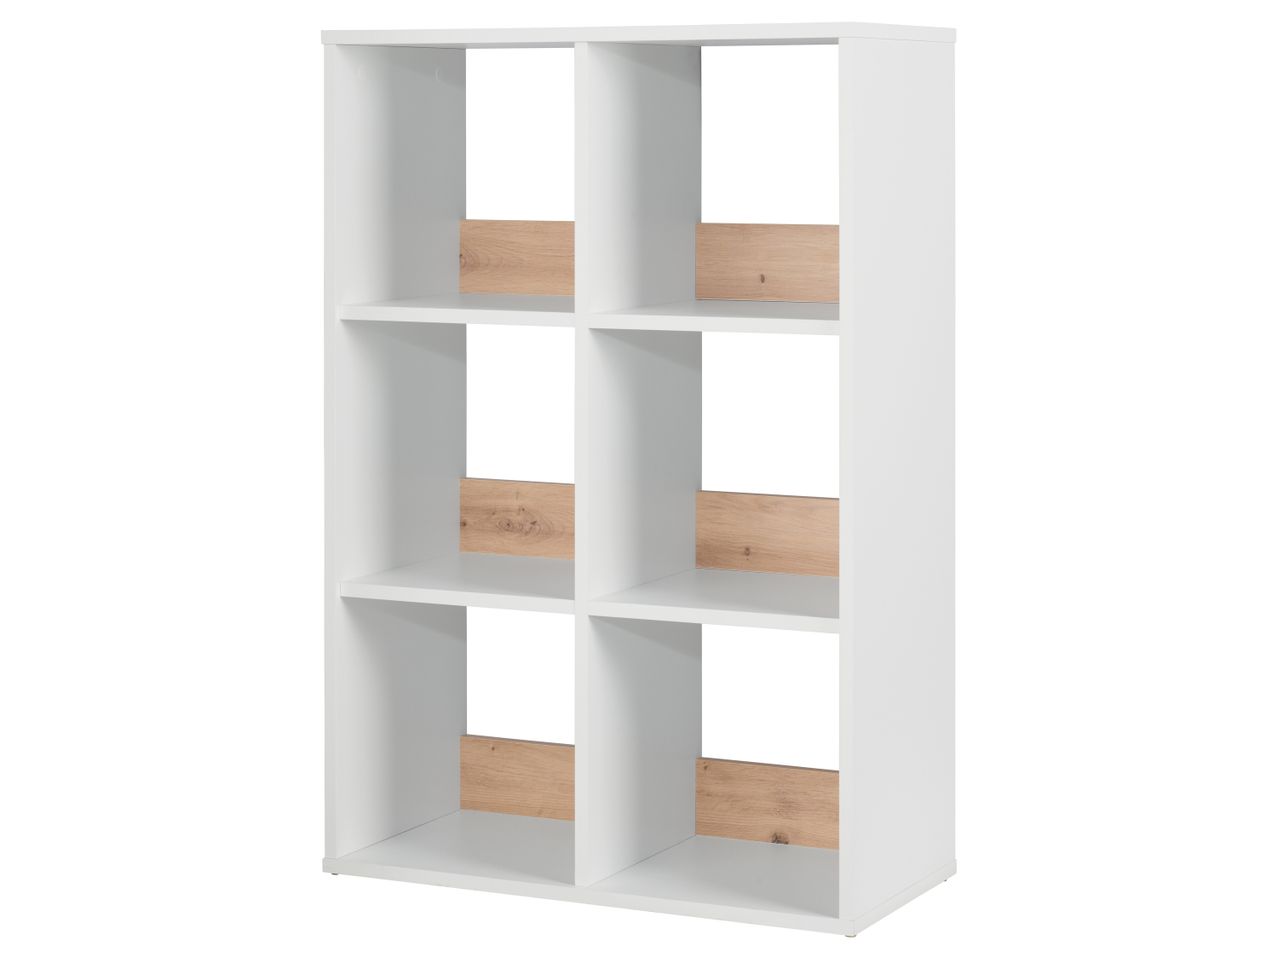 Go to full screen view: Shelving Unit with 6 compartments - Image 1